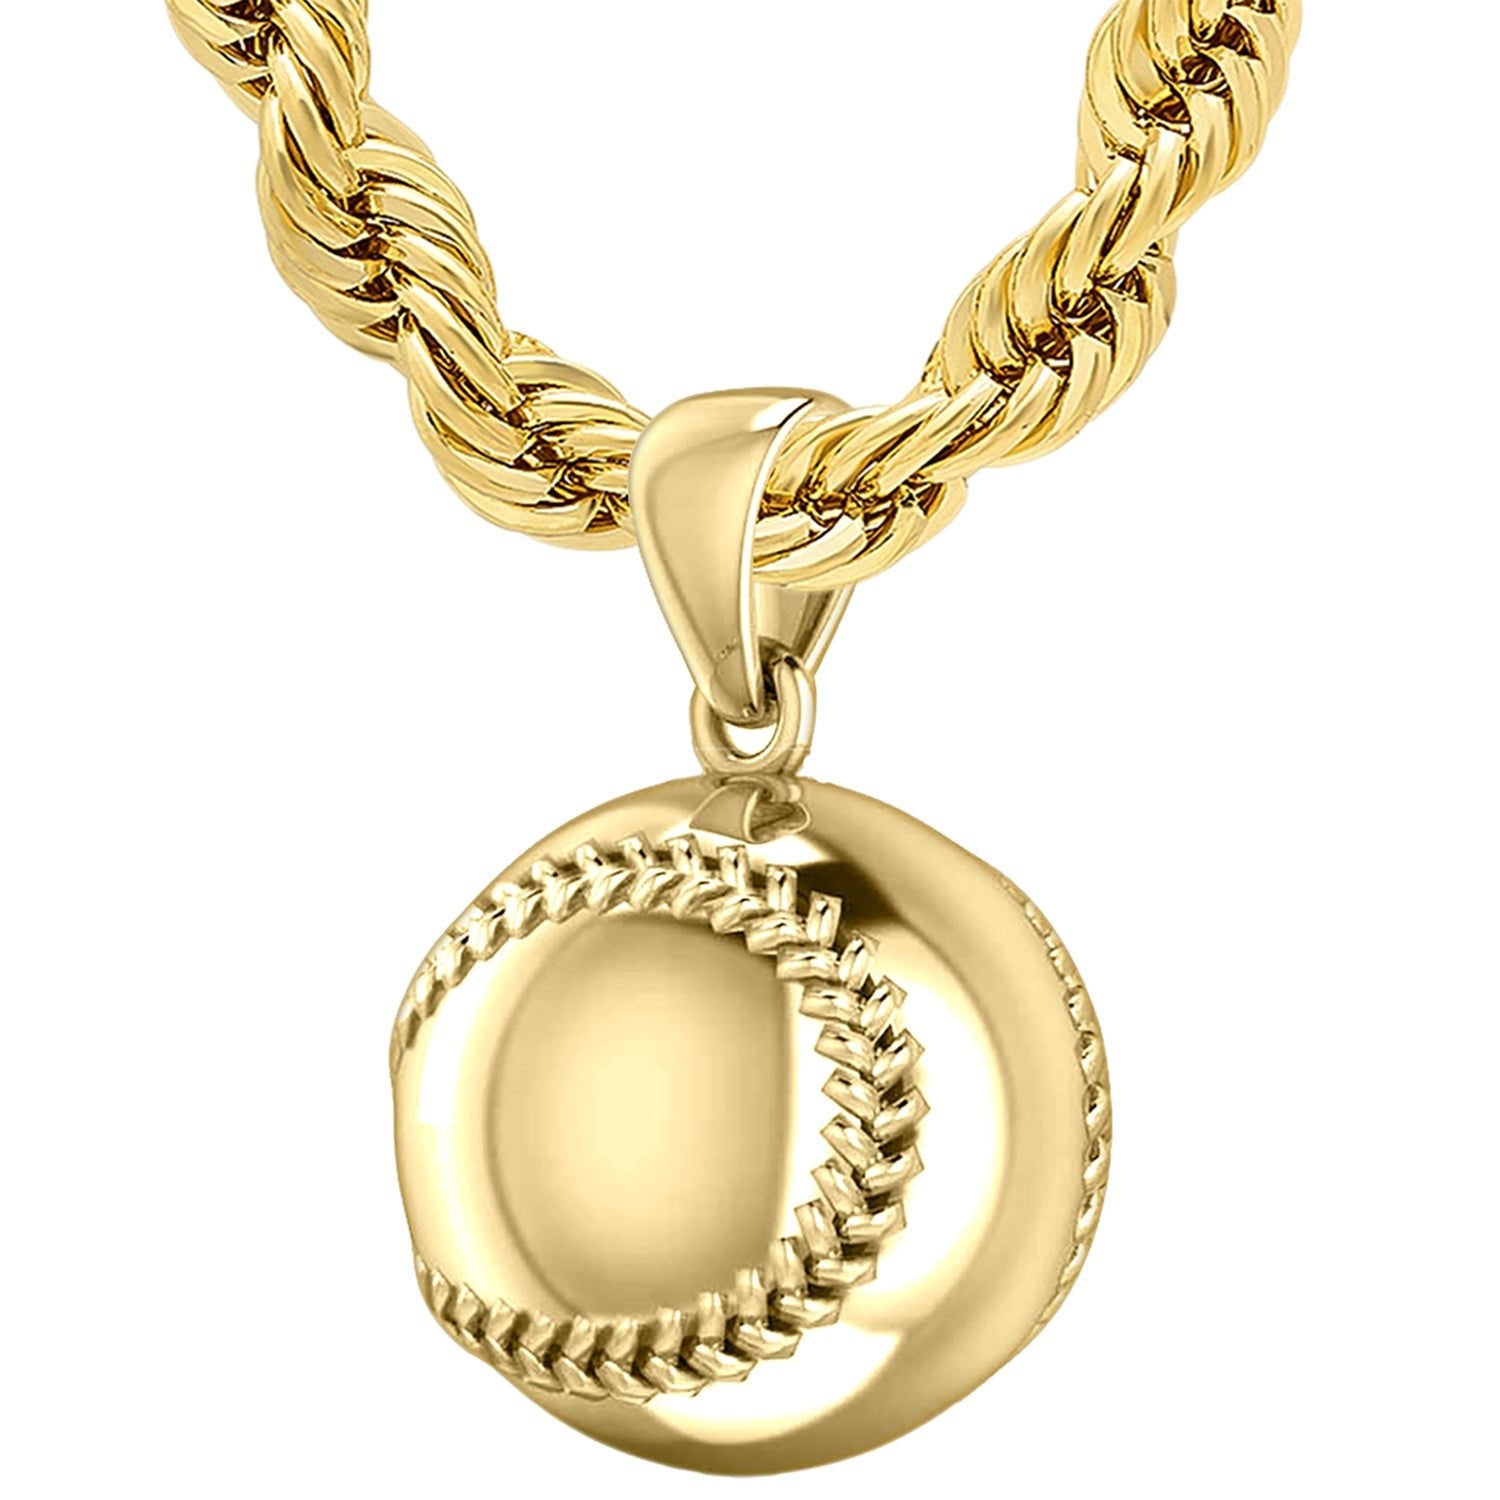 Large 10K or 14K Yellow Gold 3D Baseball Sport Ball Pendant Necklace, 18.5mm - US Jewels